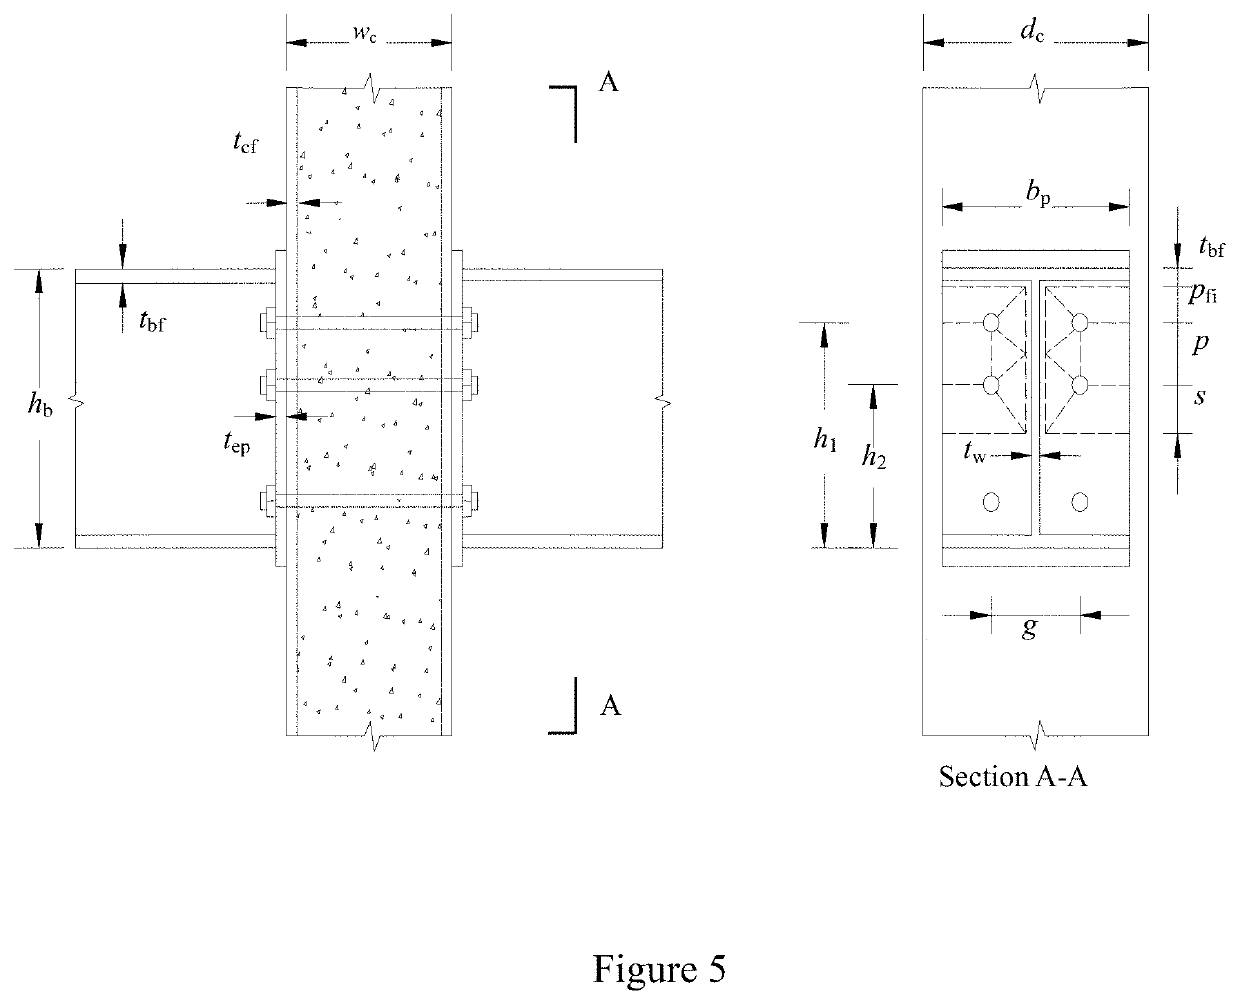 Calculation method of ultimate moment resistance and moment-rotation curve for steel beam to concrete-filled steel tube column connections with bidirectional bolts